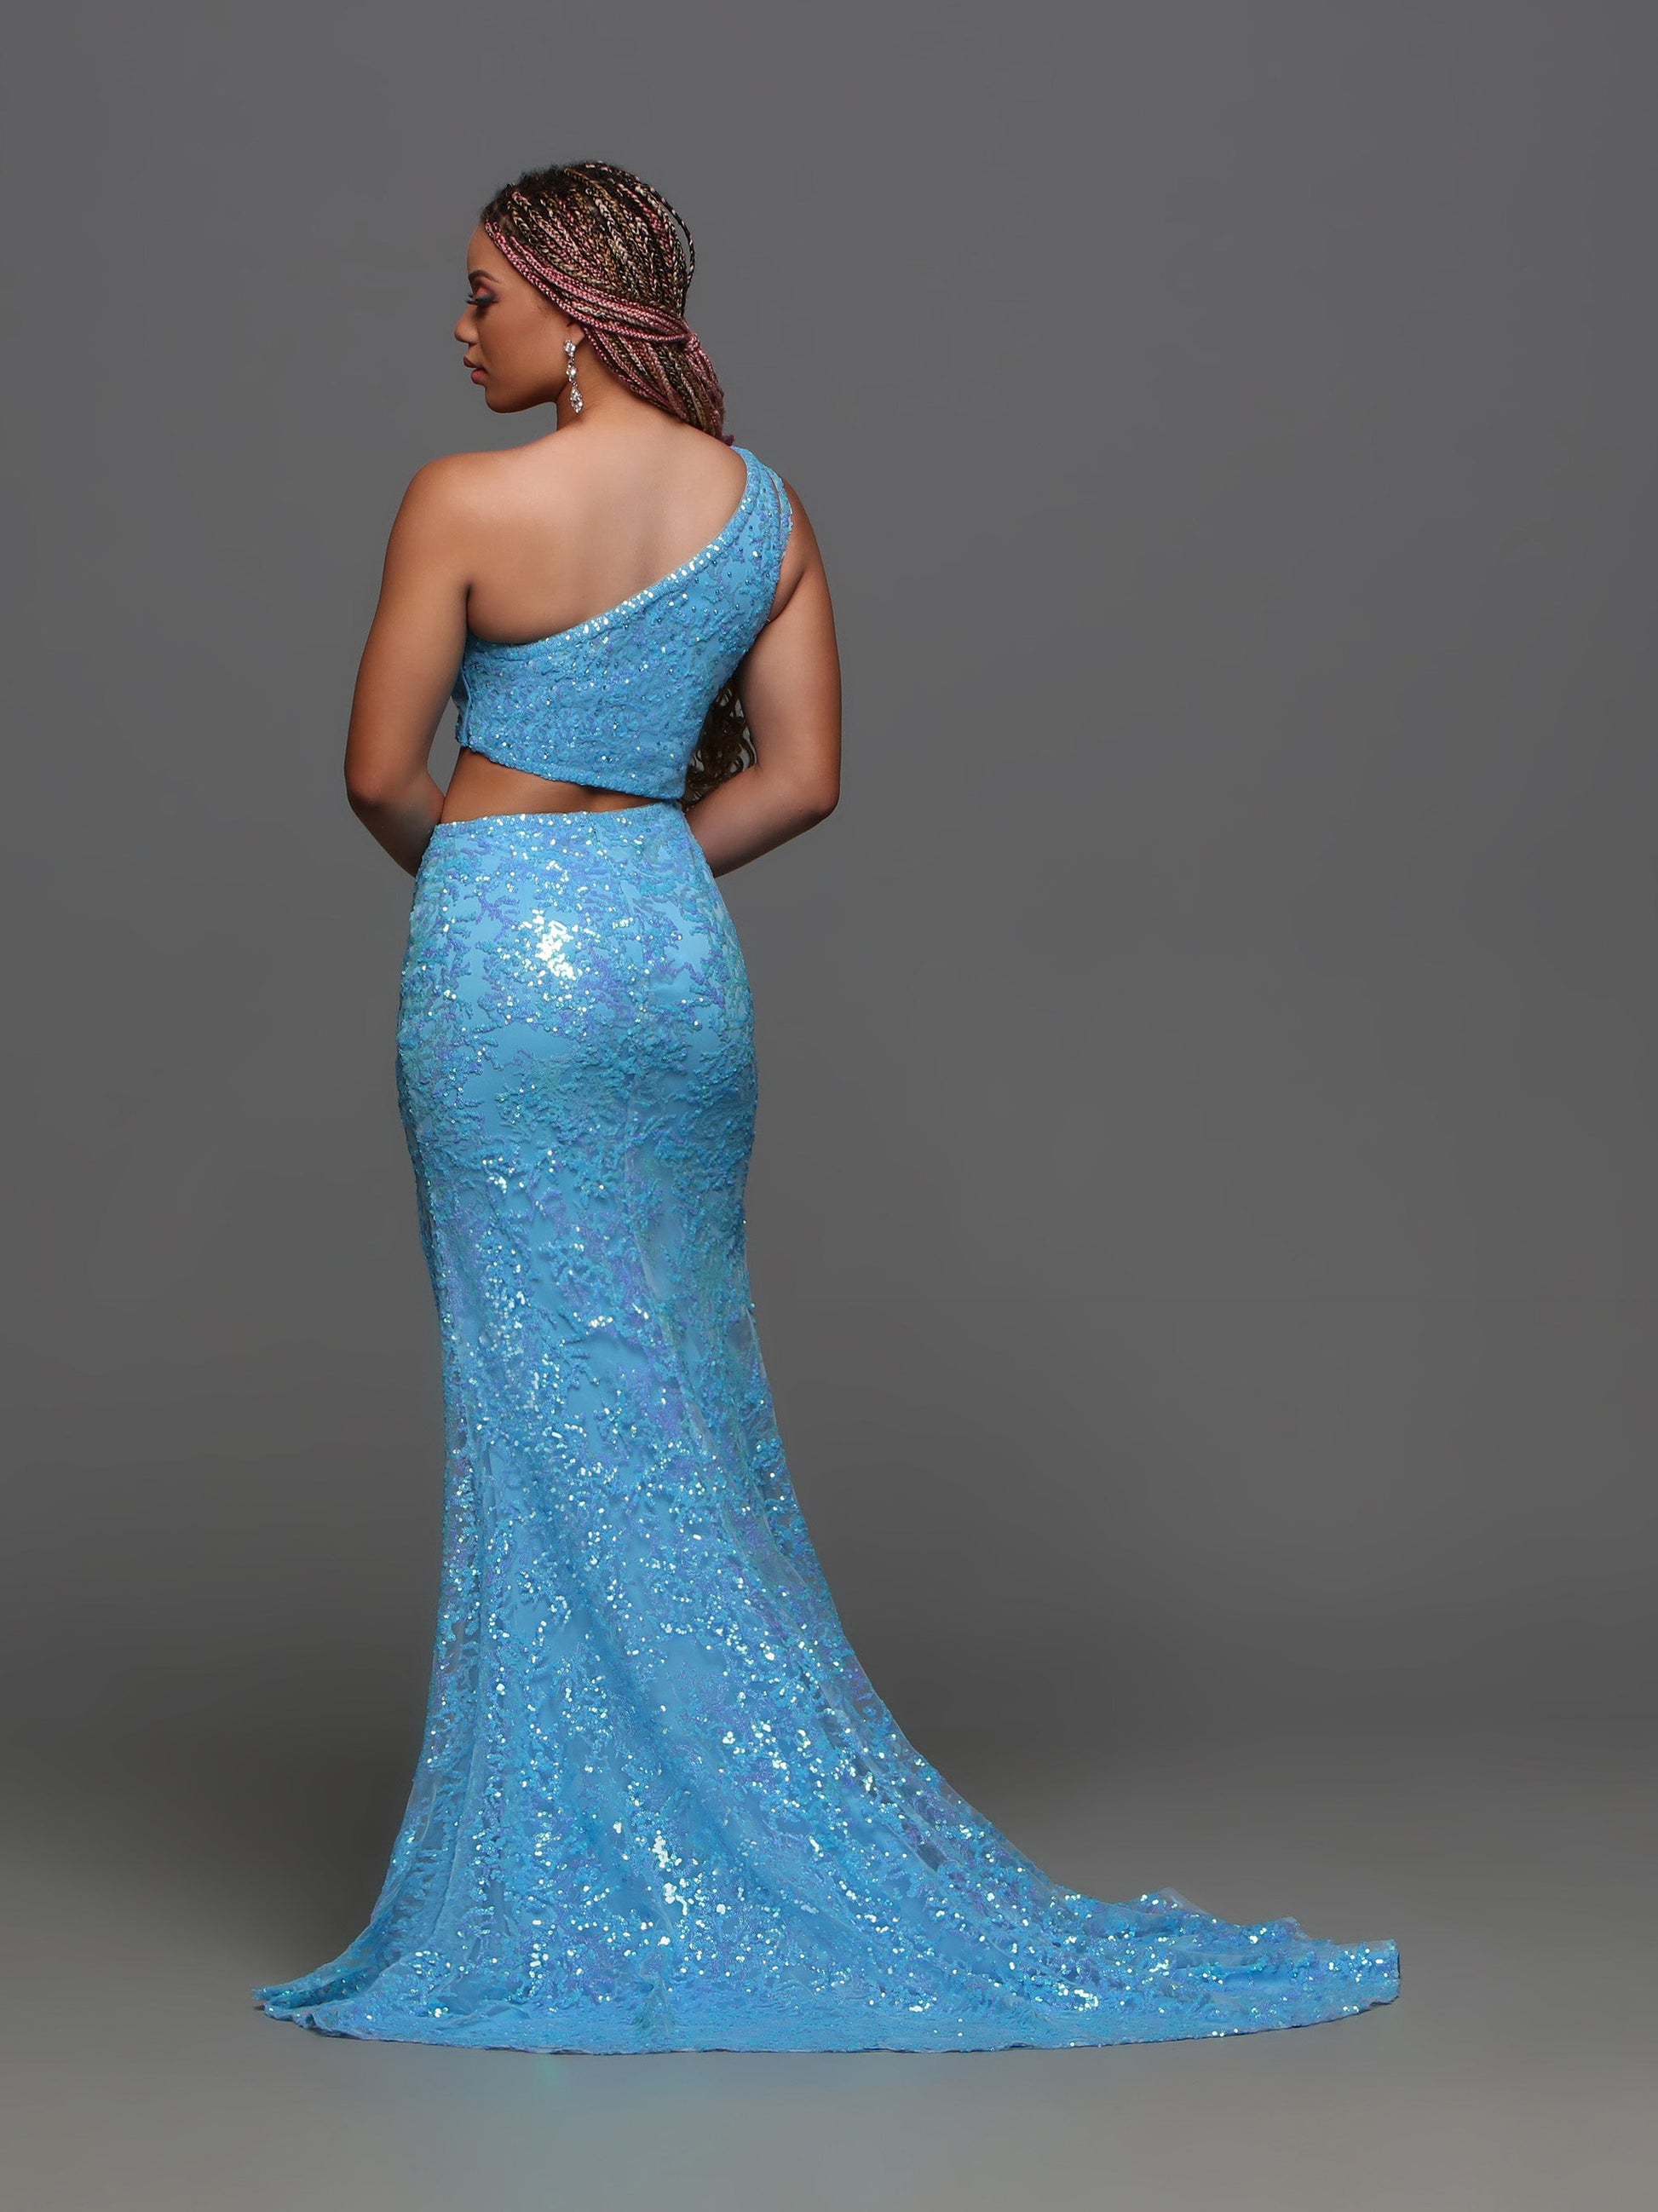 Dazzle the crowd in the Candice Wang 72389 Prom Dress. Featuring an alluring one shoulder design with intricate sequin cutouts, this gown exudes elegance and glamour. The thigh-high slit and train add a touch of drama to this formal dress. Perfect for standing out at prom or any special occasion.  Sizes:: 0-20  Colors: Blue